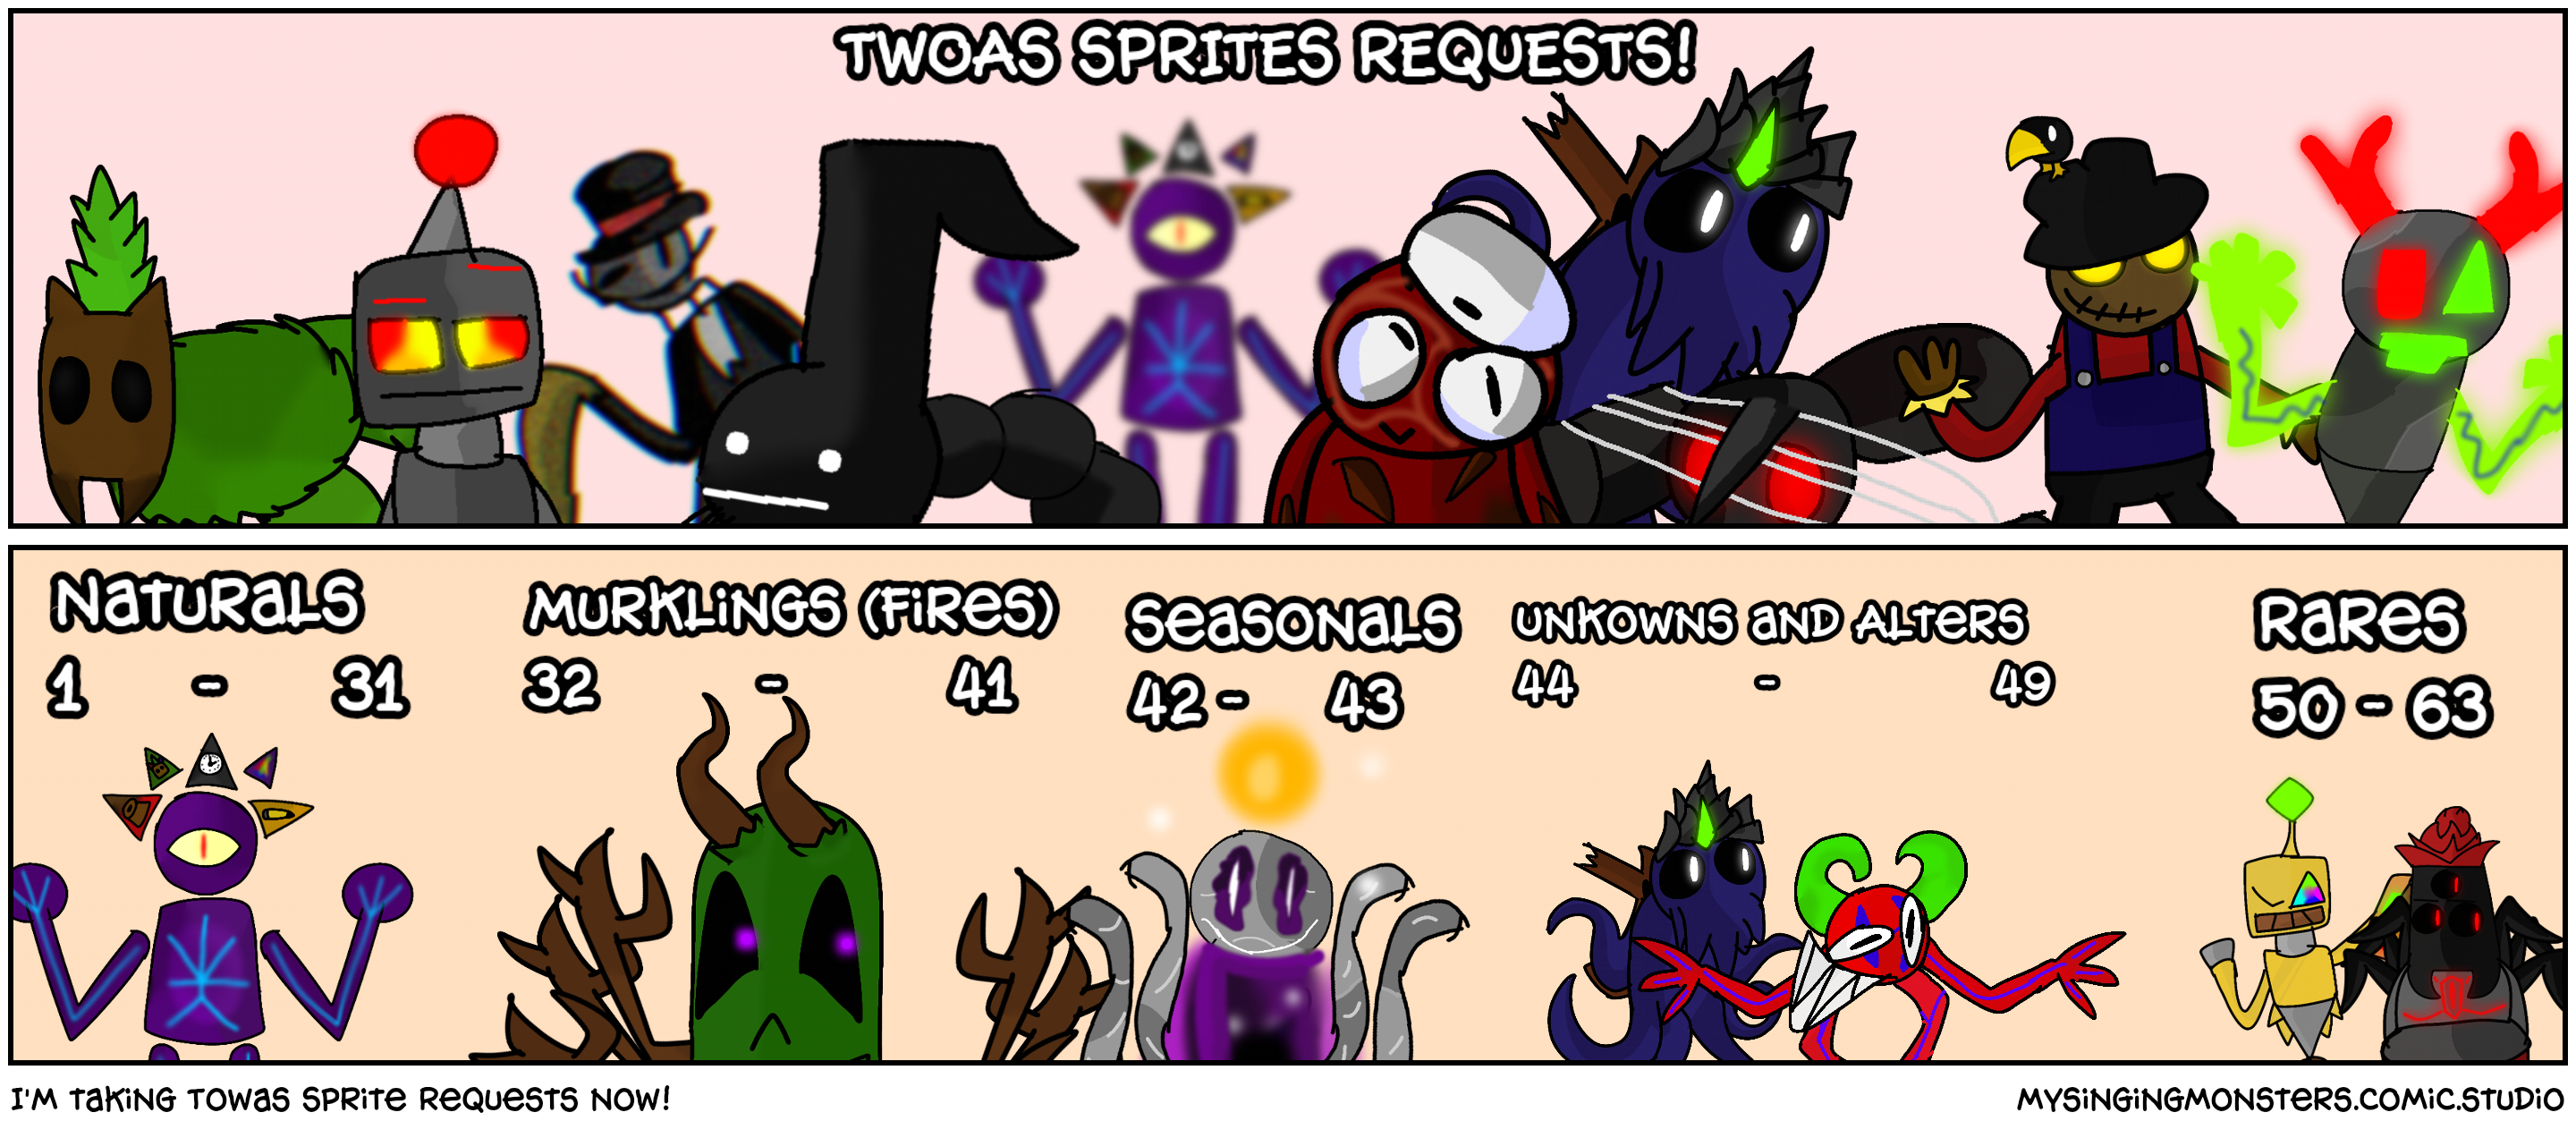 I'm taking Towas Sprite Requests now!